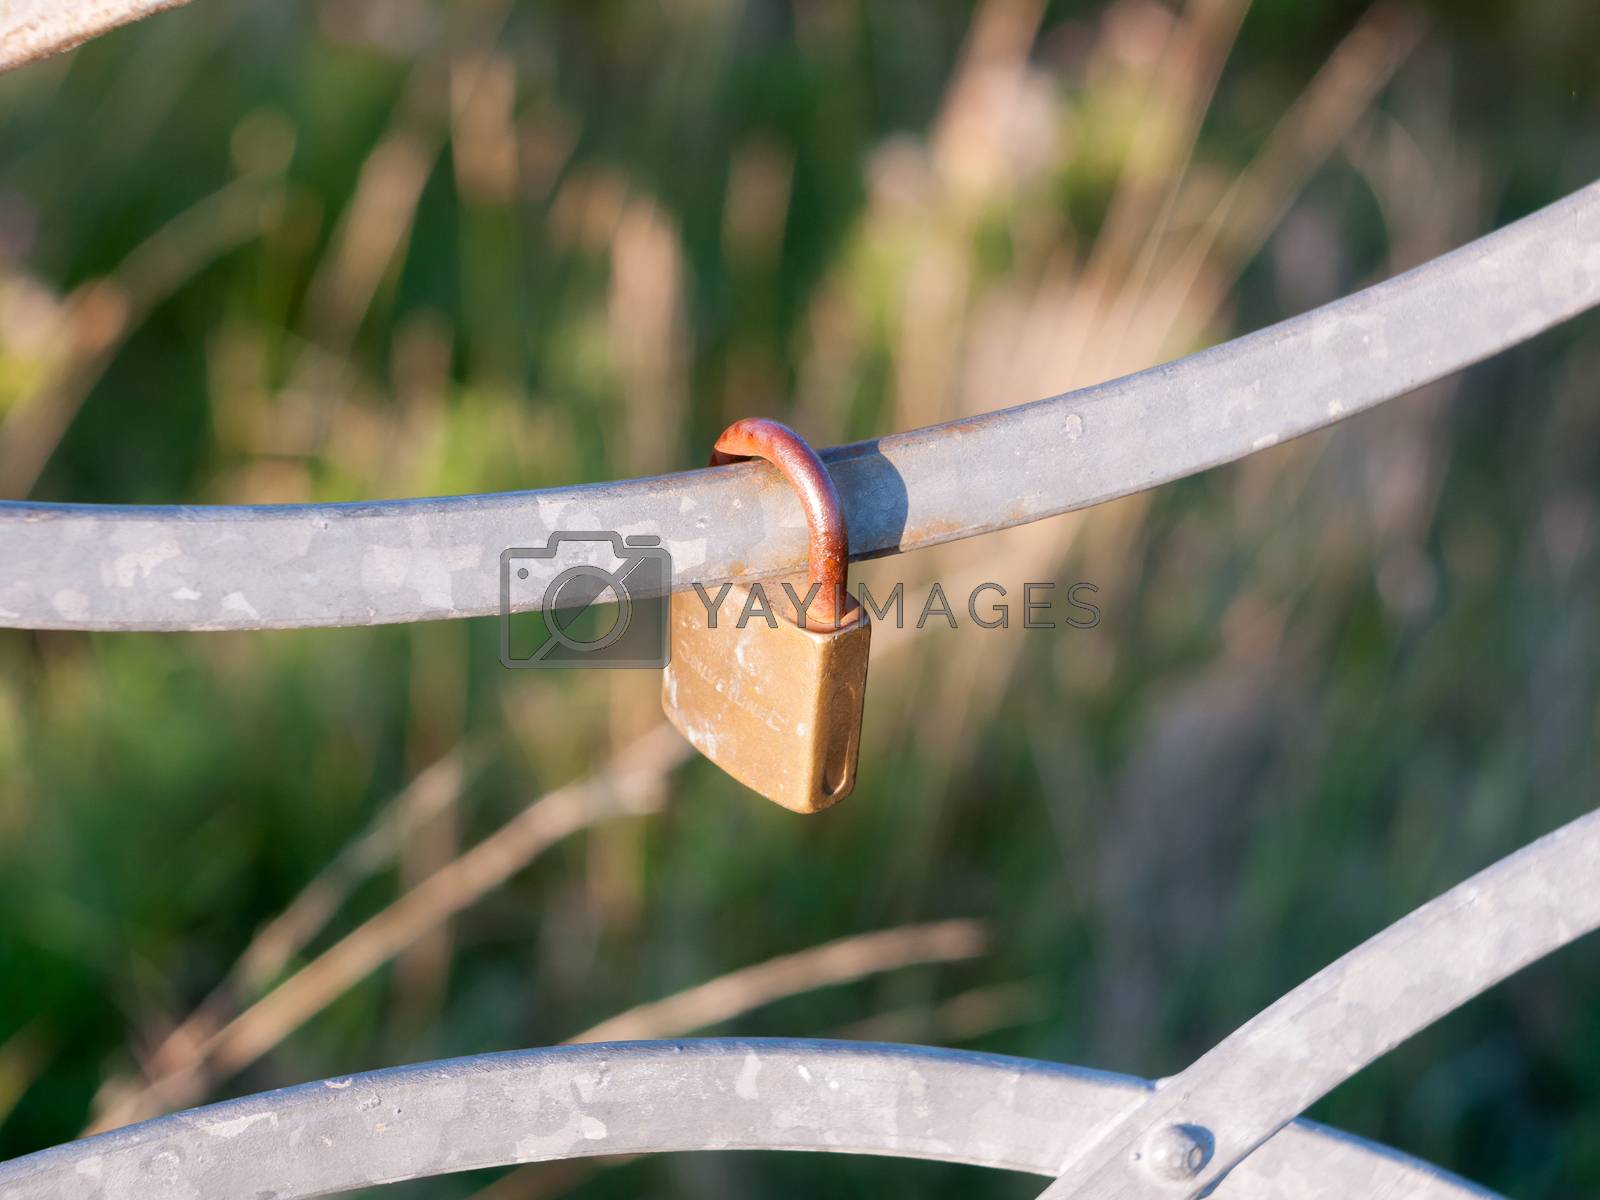 Royalty free image of an old locked metal padlock outside on rail by callumrc